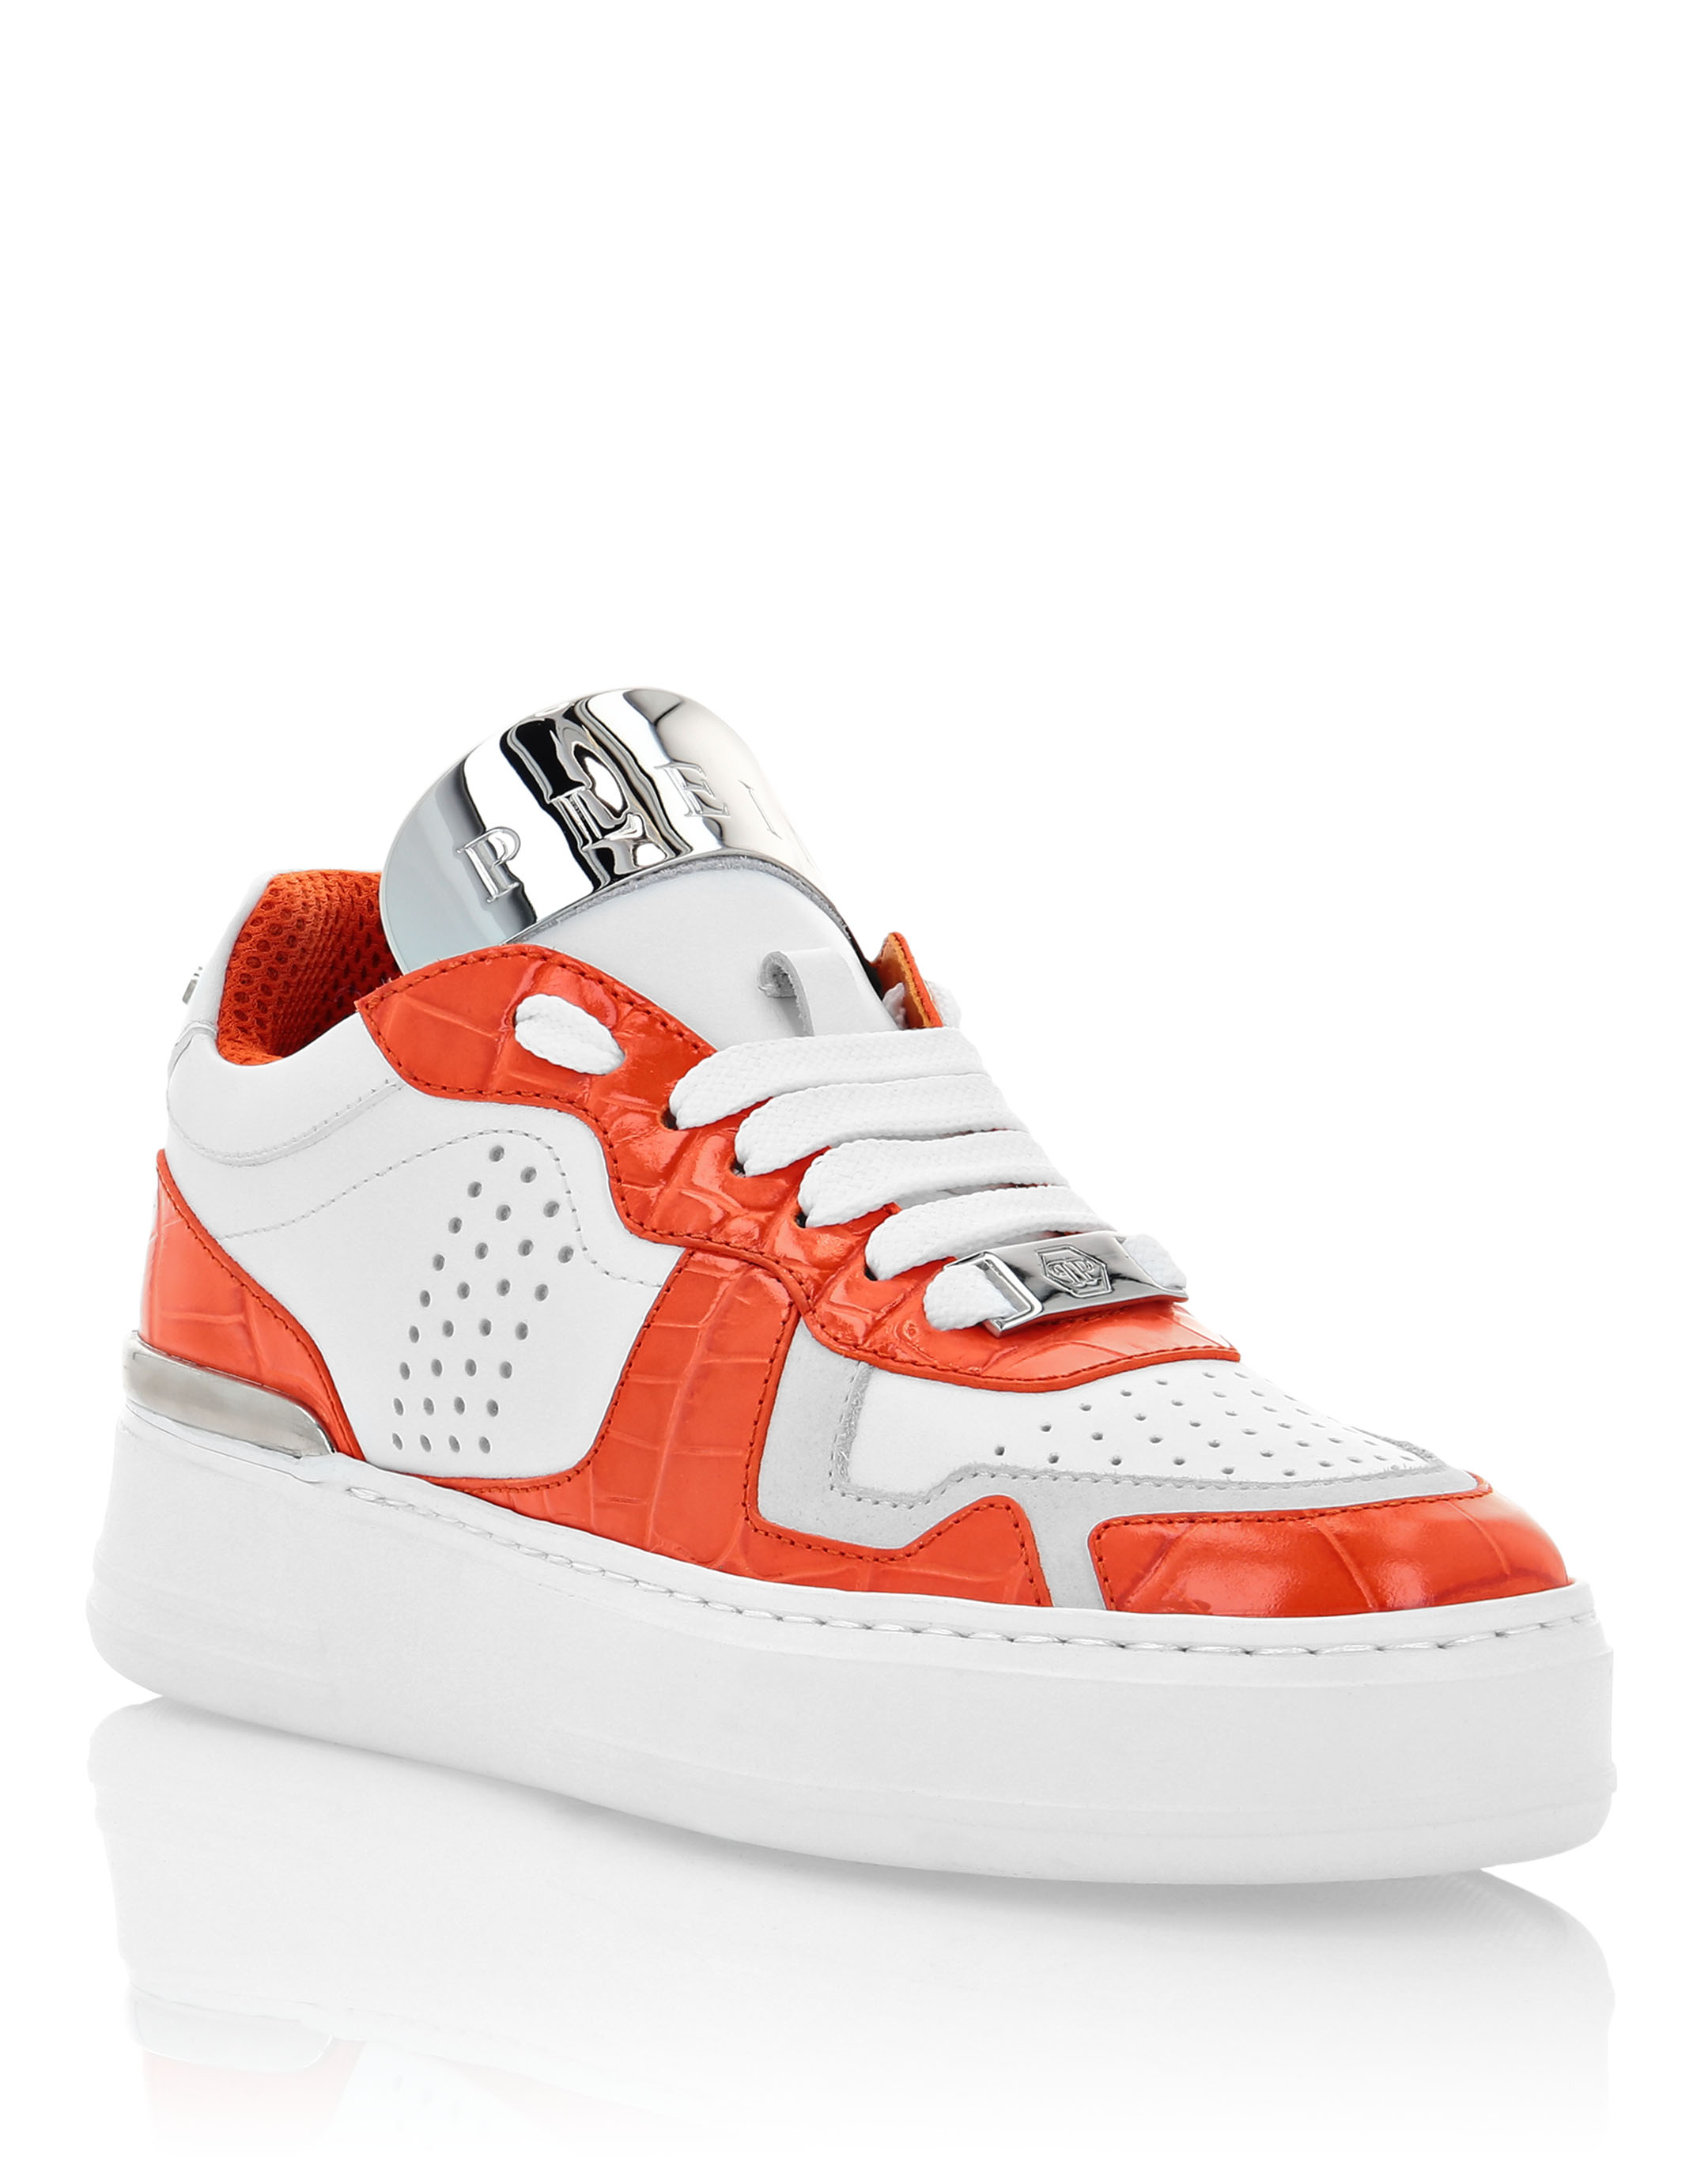 LO-TOP SNEAKERS SILVER $URFER COCCO PRINT | Philipp Plein Outlet